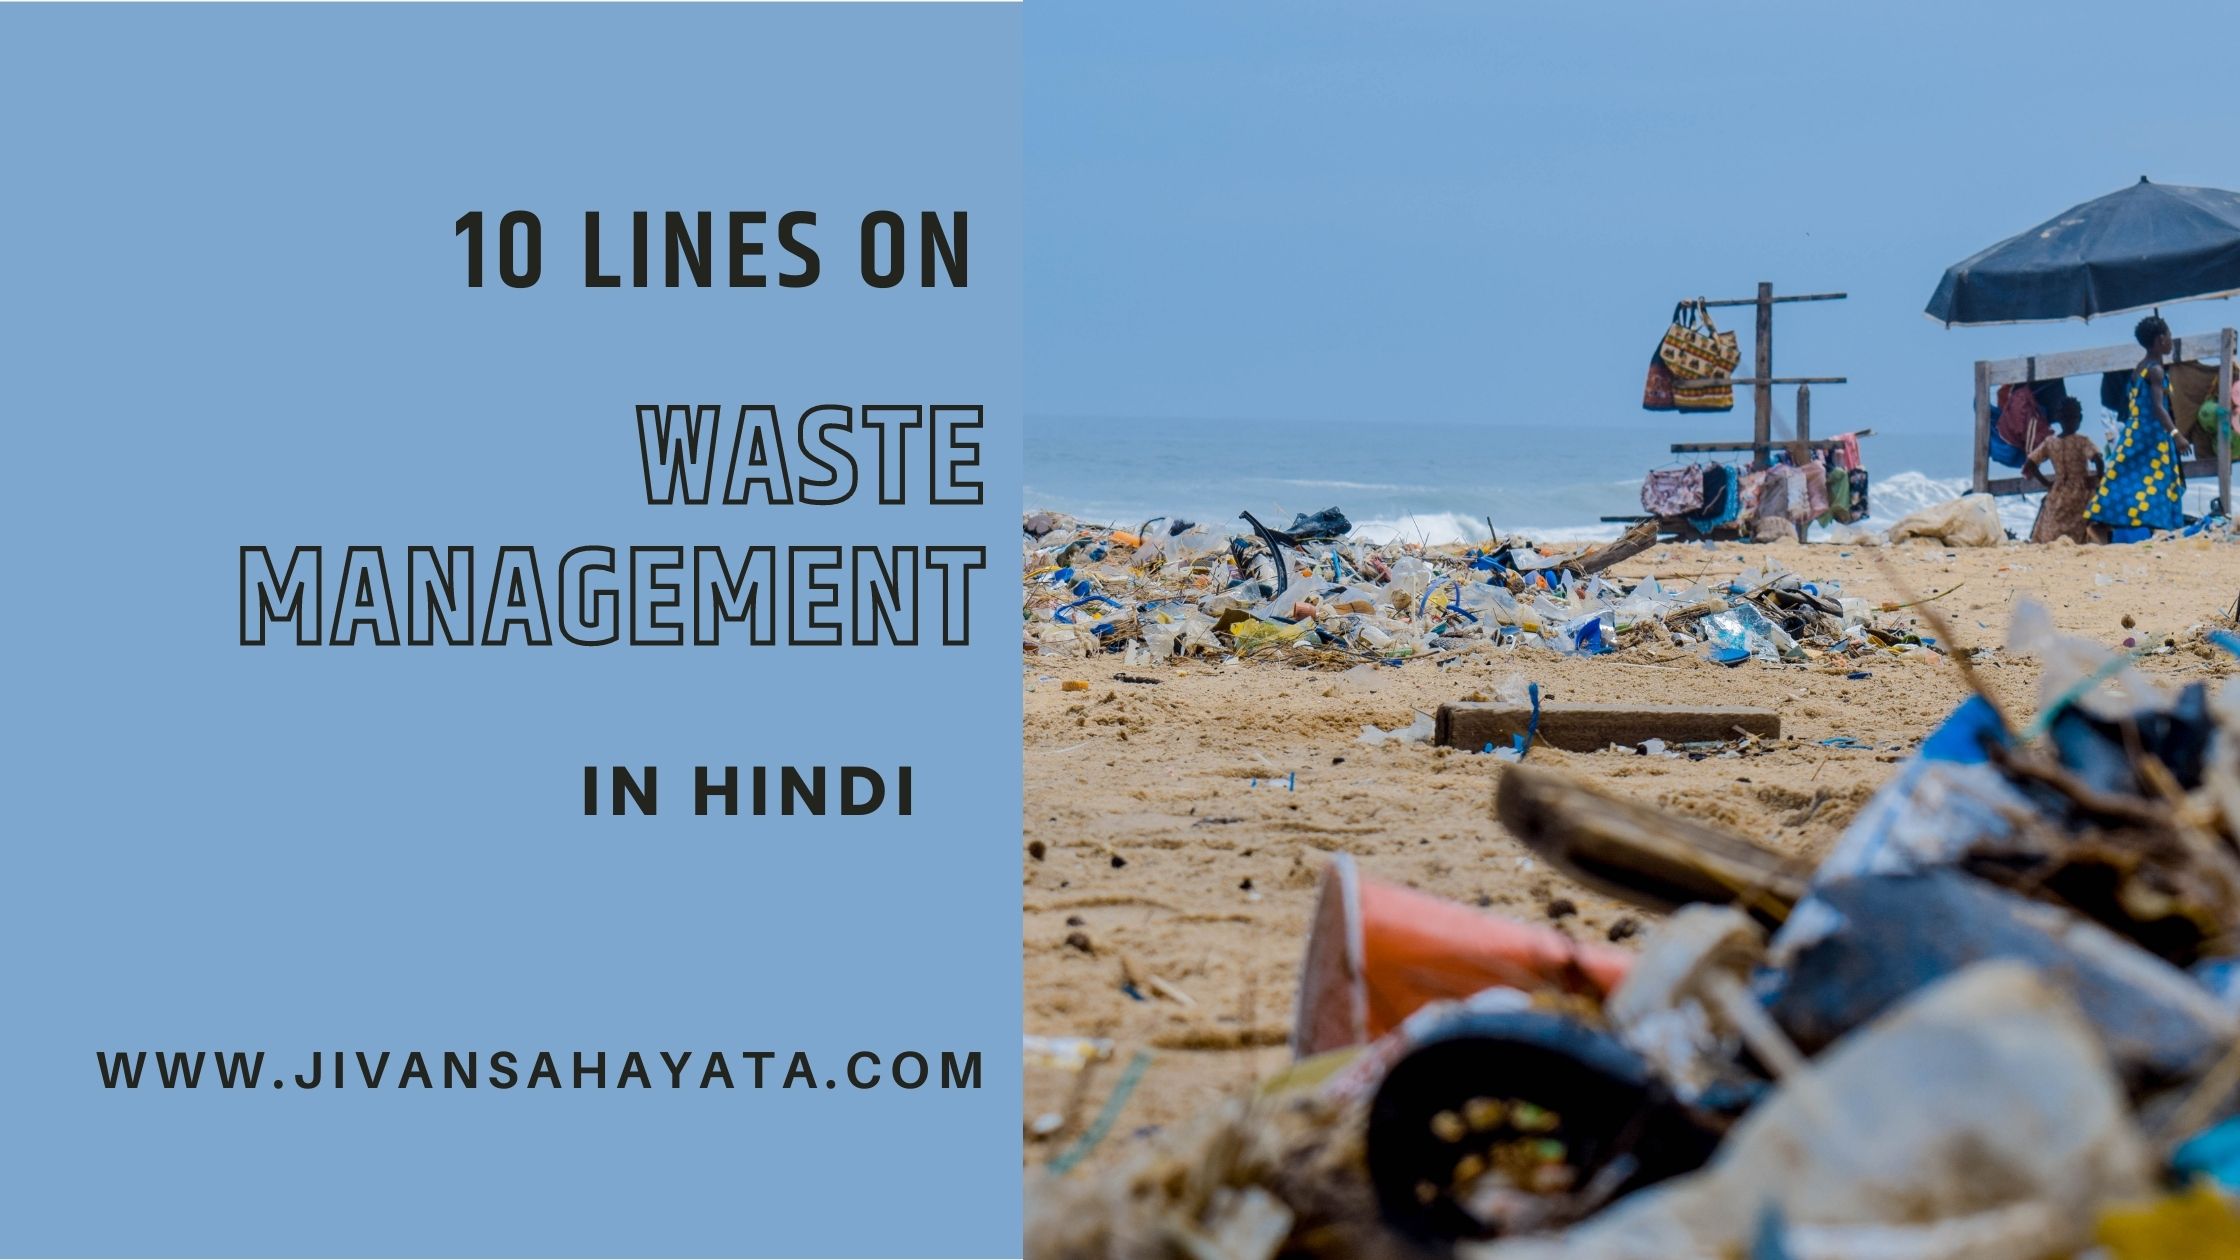 10 lines on Waste Management in Hindi